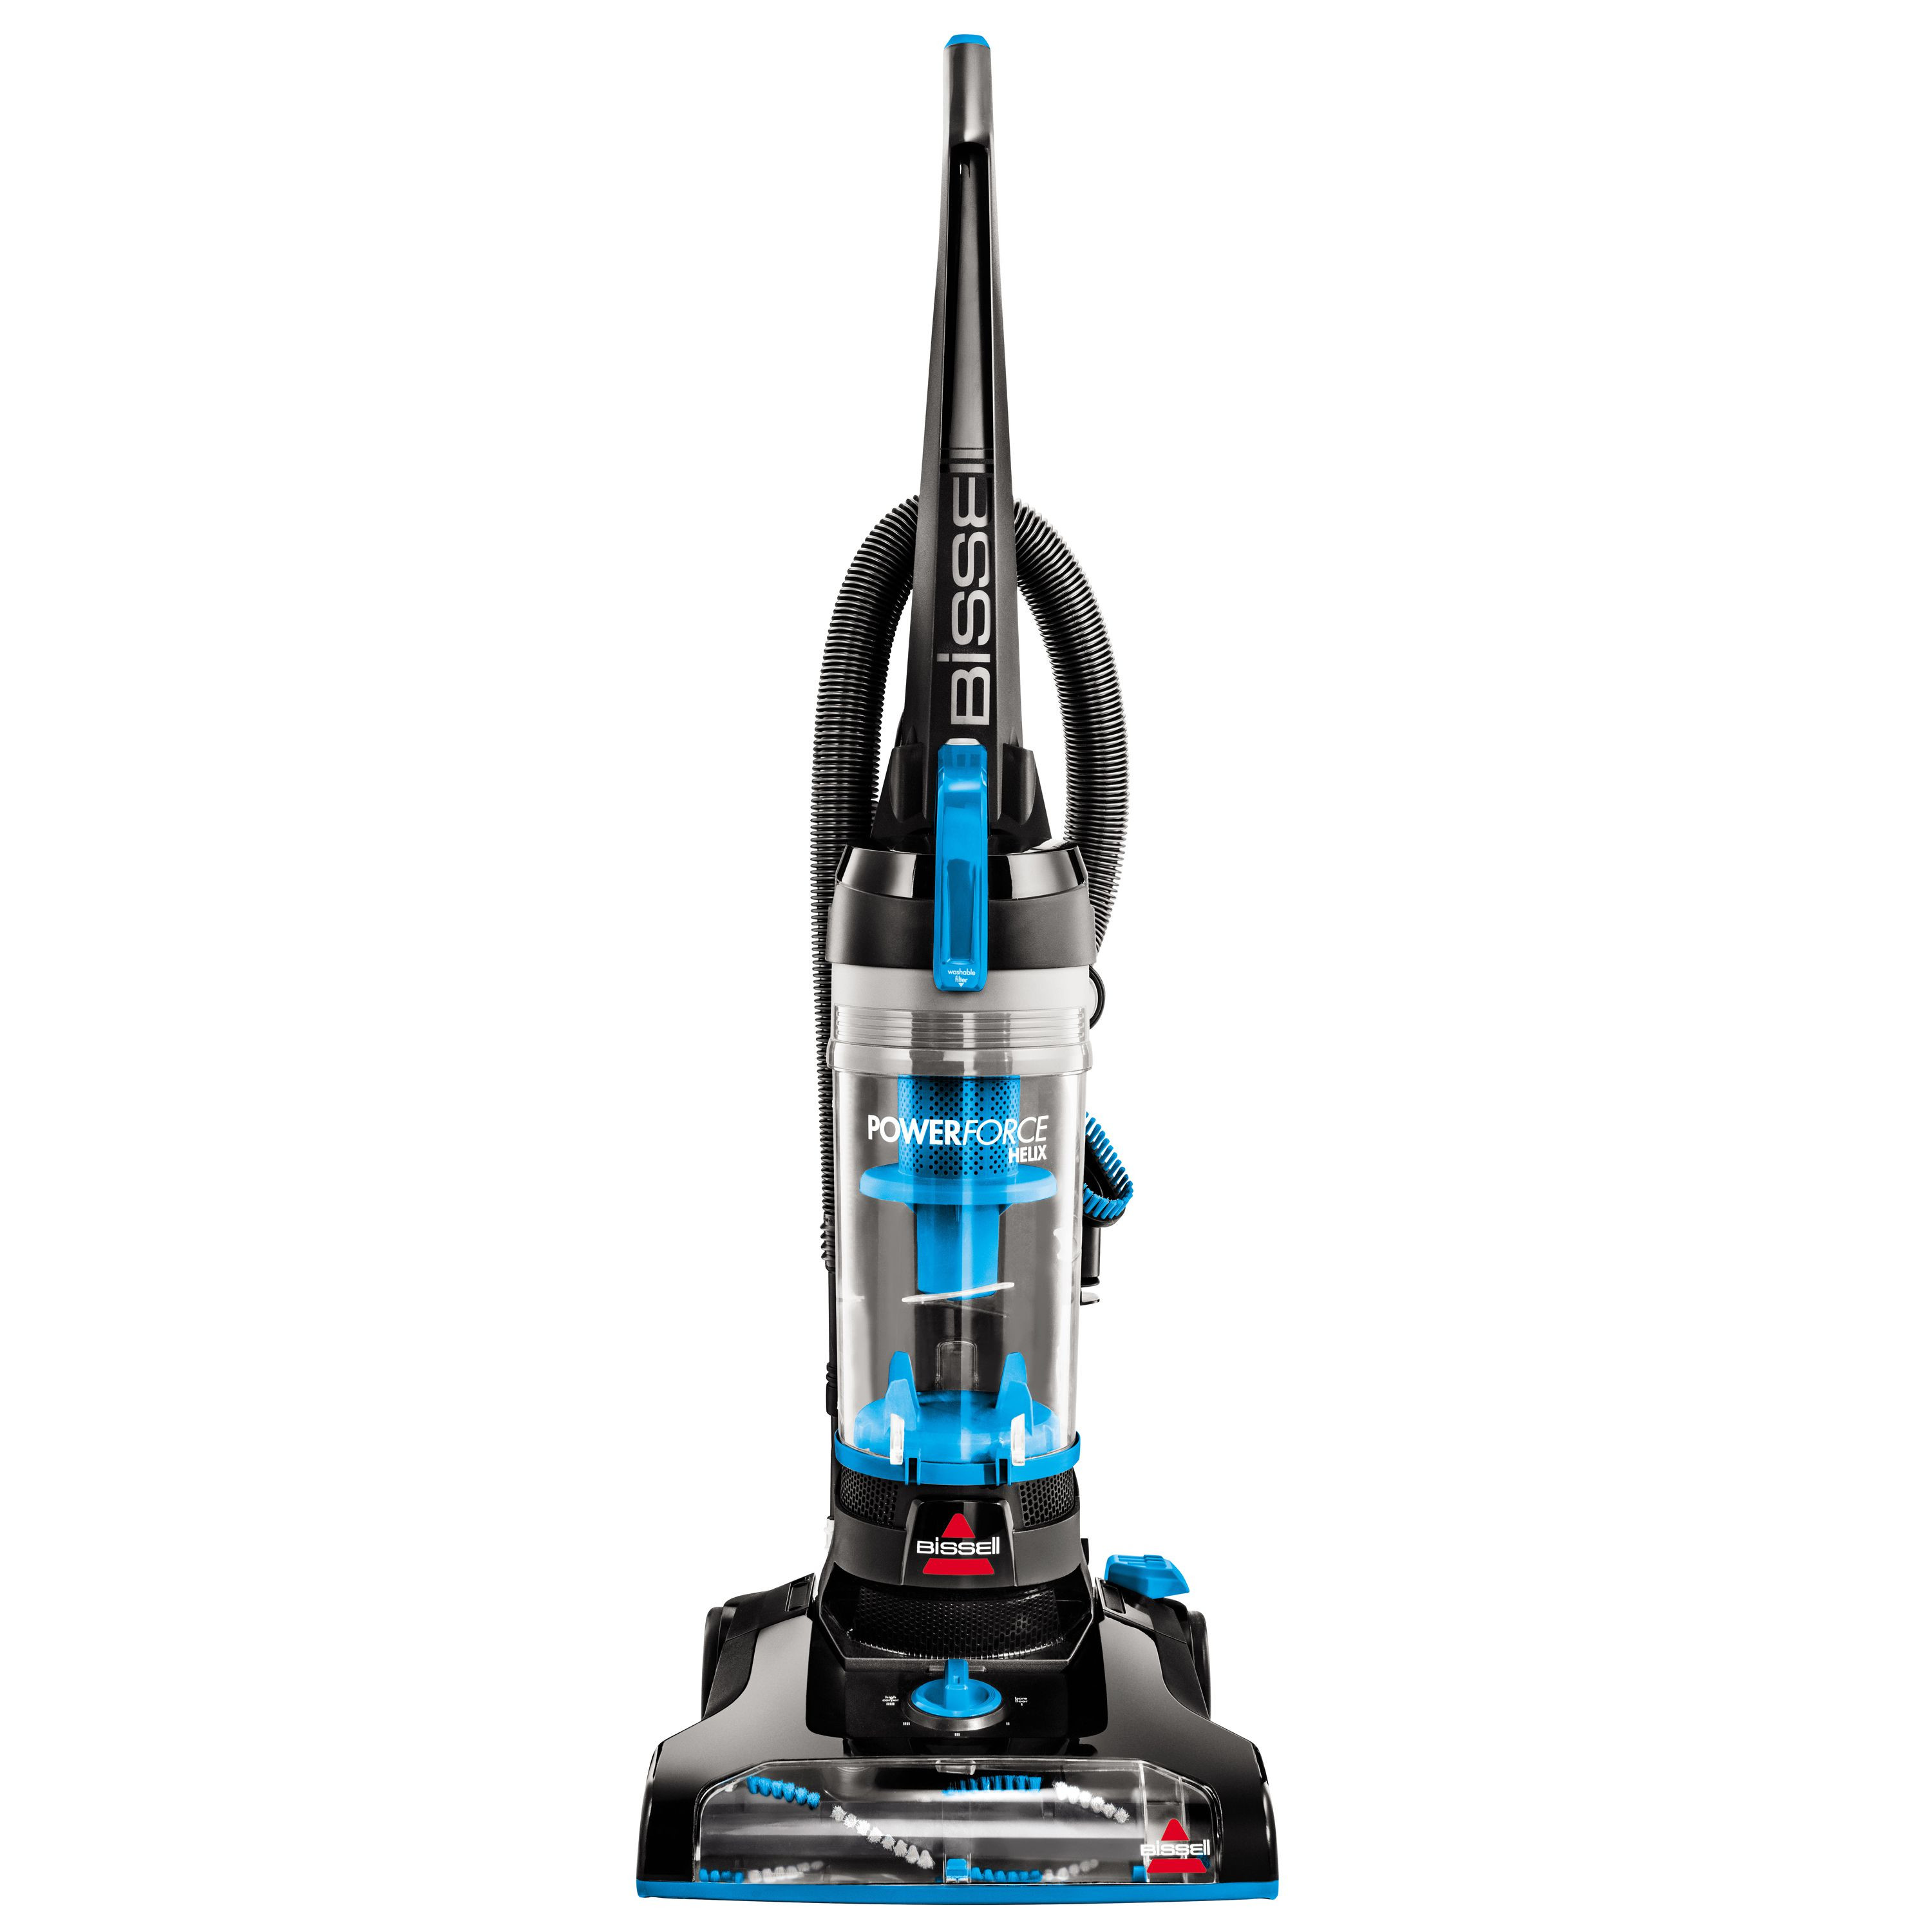 14 Great top Vacuums for Hardwood Floors 2022 free download top vacuums for hardwood floors of the 10 best vacuum cleaners to buy in 2018 inside e4b12fd4 906f 4bf0 a270 afe8dc531860 1 c698176588ad49a4cf1bde639e9a838a 5bace08ac9e77c00257d9454